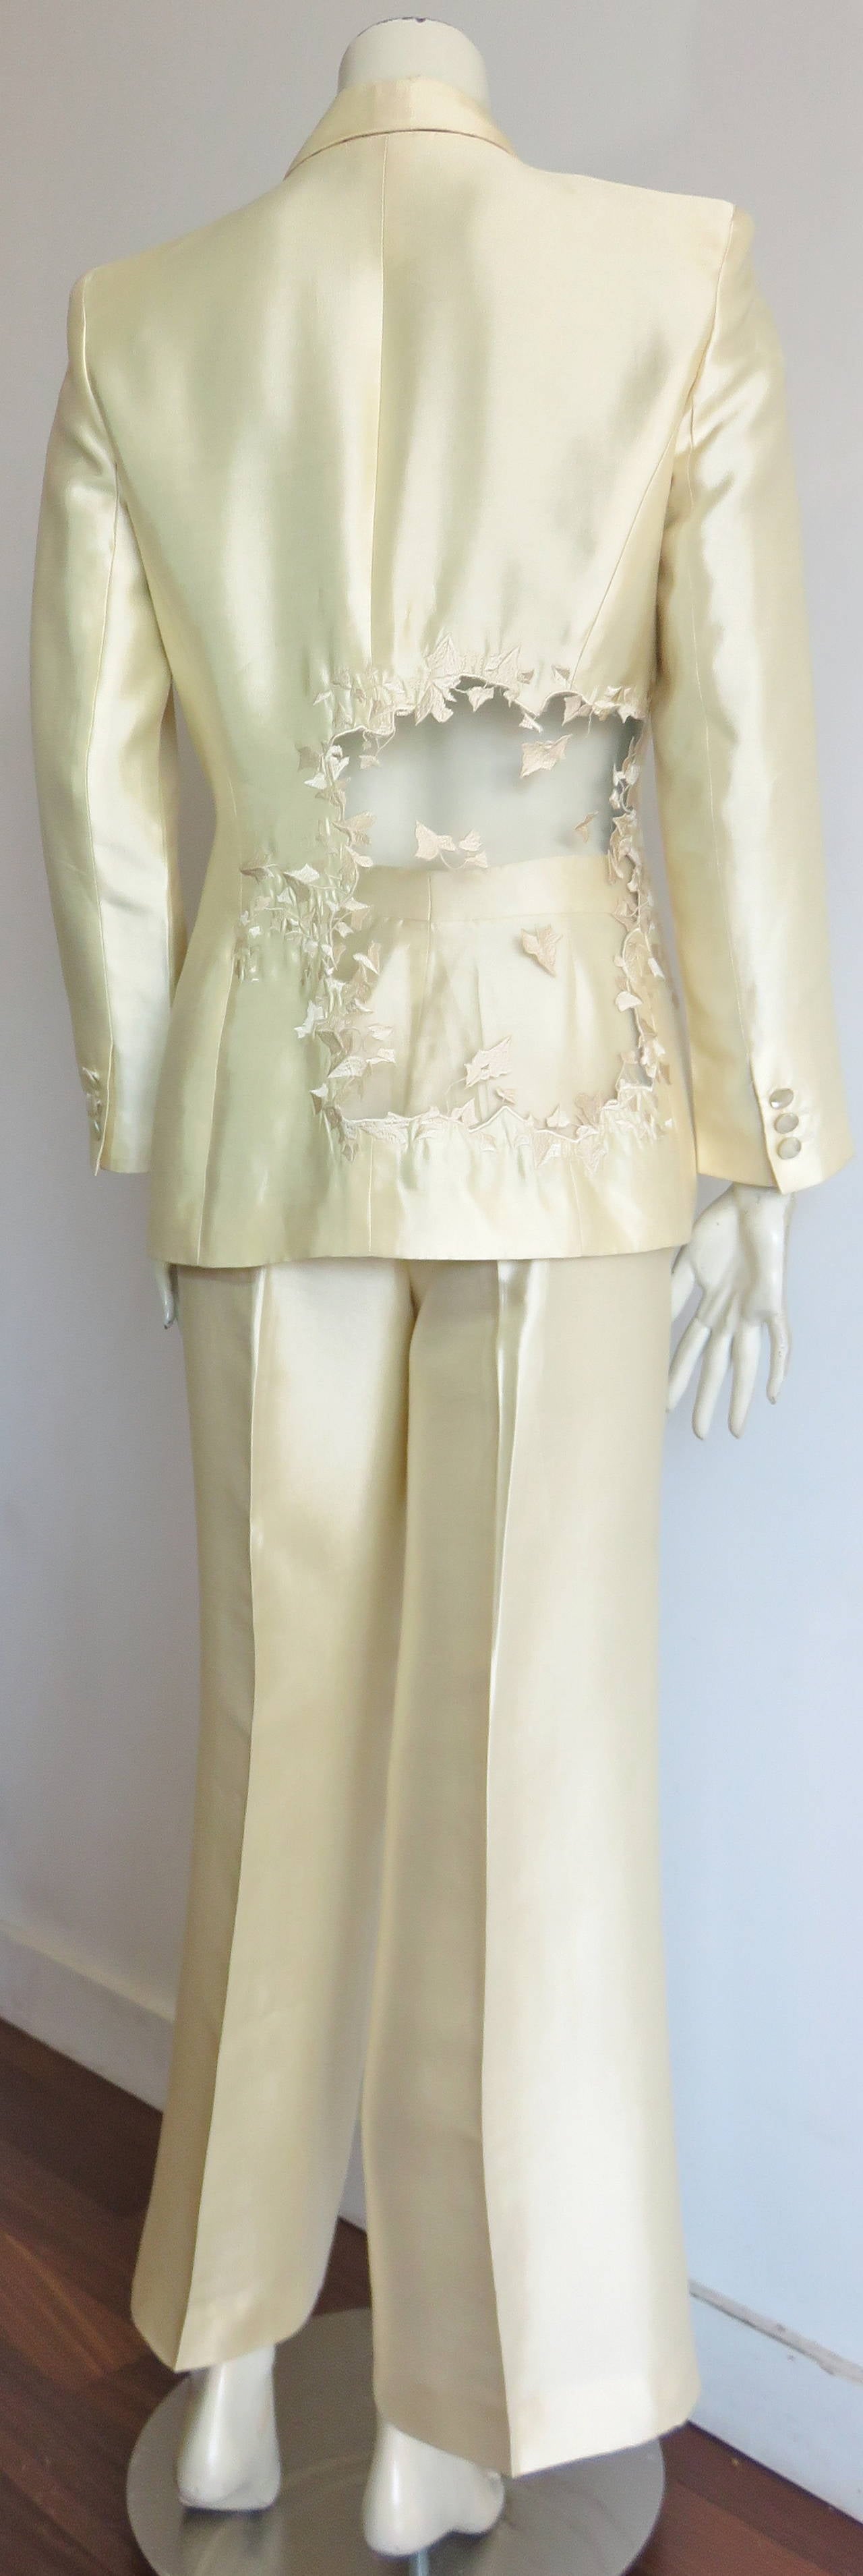 1990's ALEXANDER McQUEEN Women's embroidered satin tuxedo suit.

Gorgeous mesh, cut-out 'window effect at lower, back right panel of jacket.  The cut-out construction is embroidered with ivy leaf edge detail motifs with embroidery onto the sheer